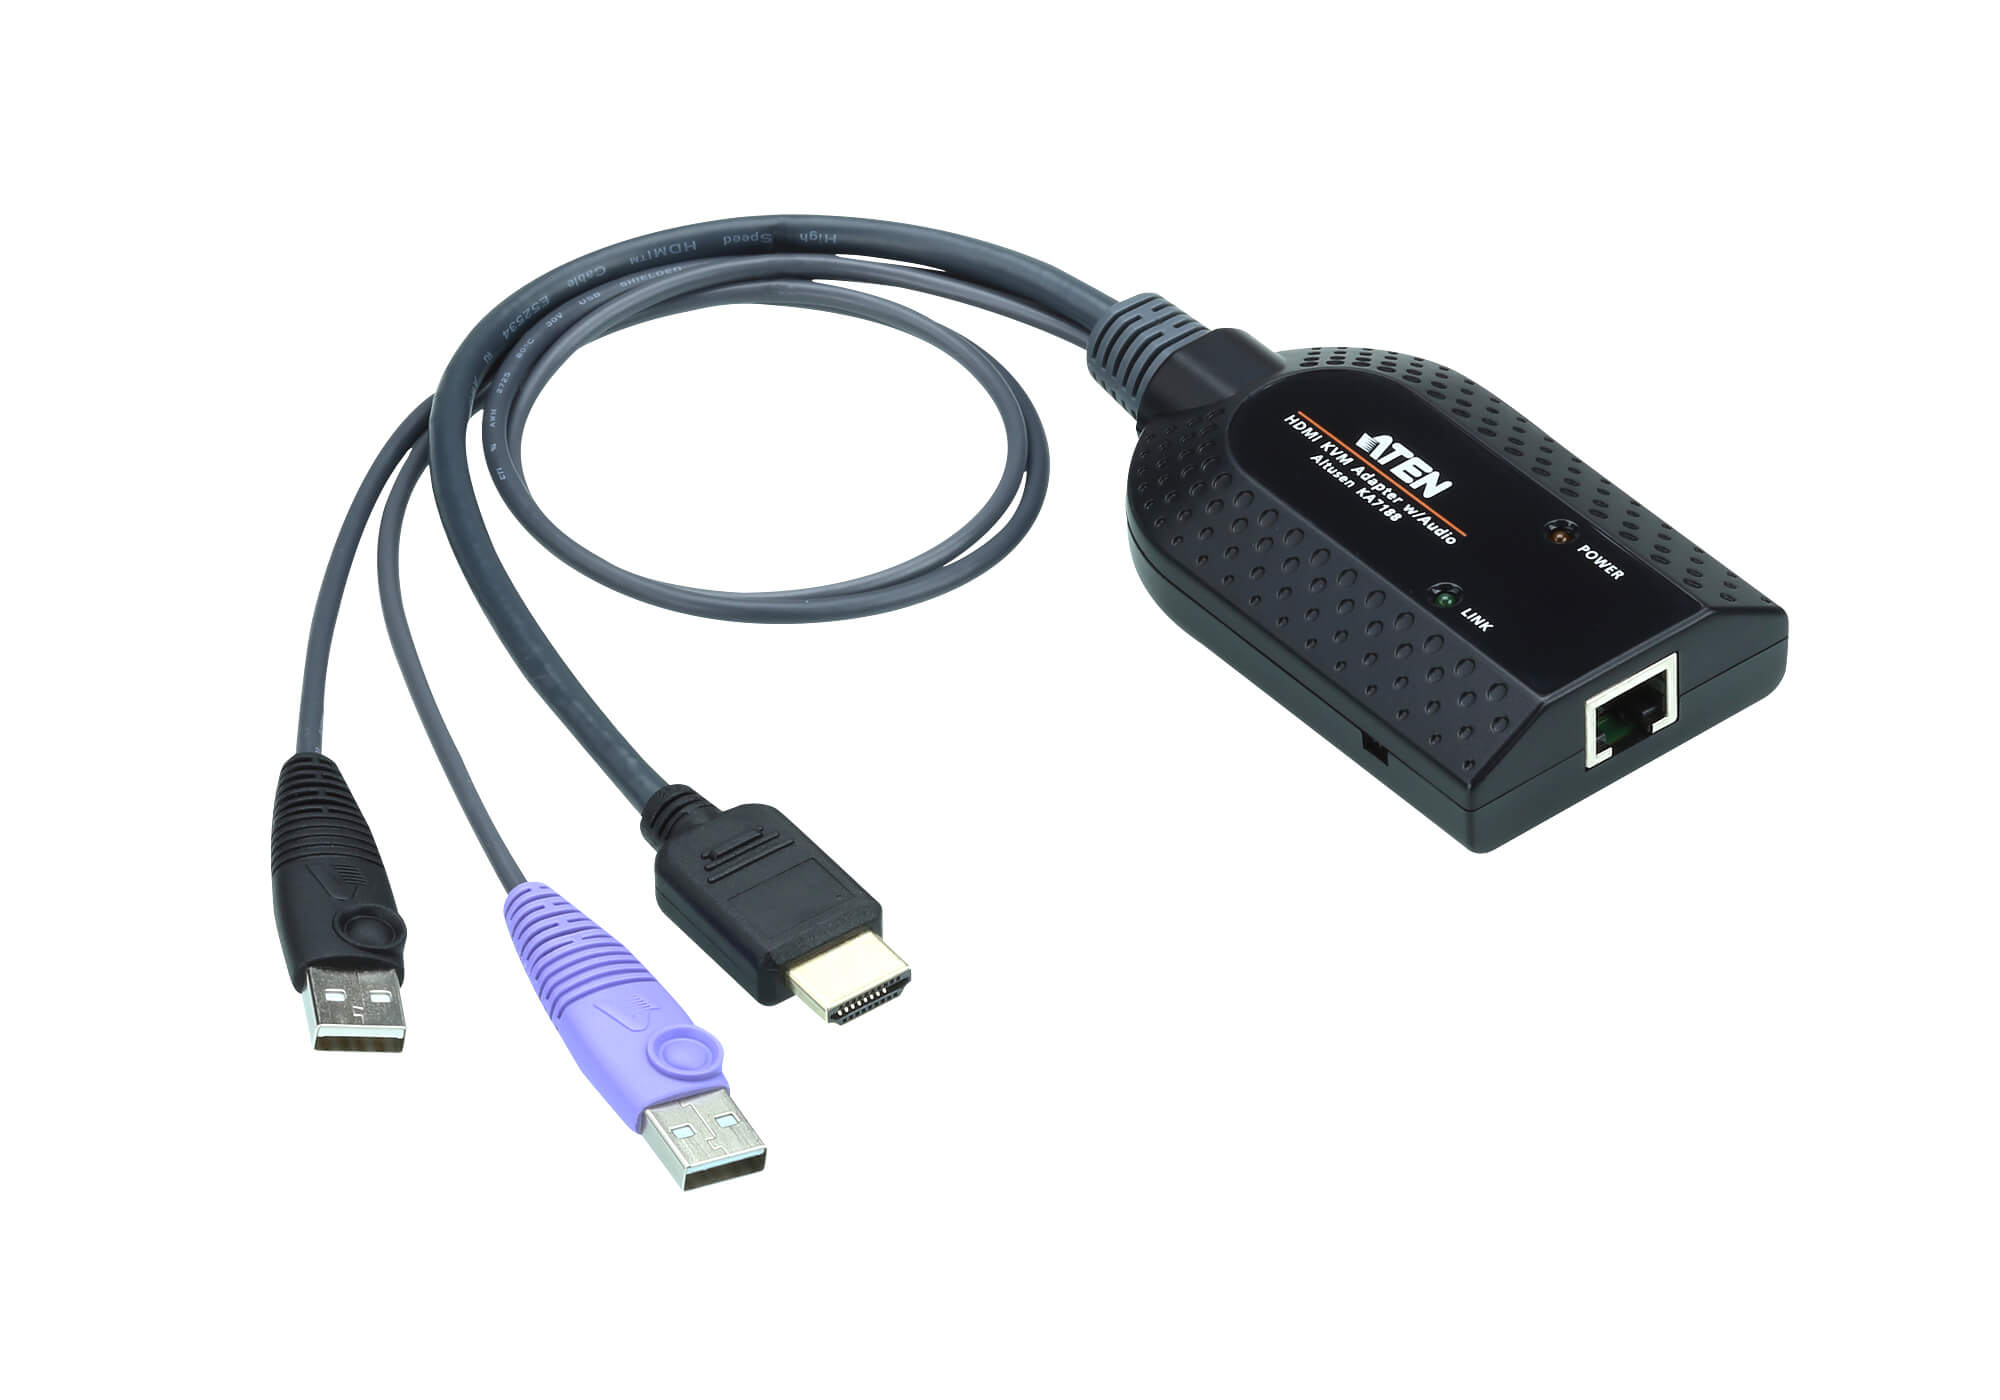 Aten HDMI USB Virtual Media KVM Adapter with digital Audio on HDMI signal, for KM and KN series